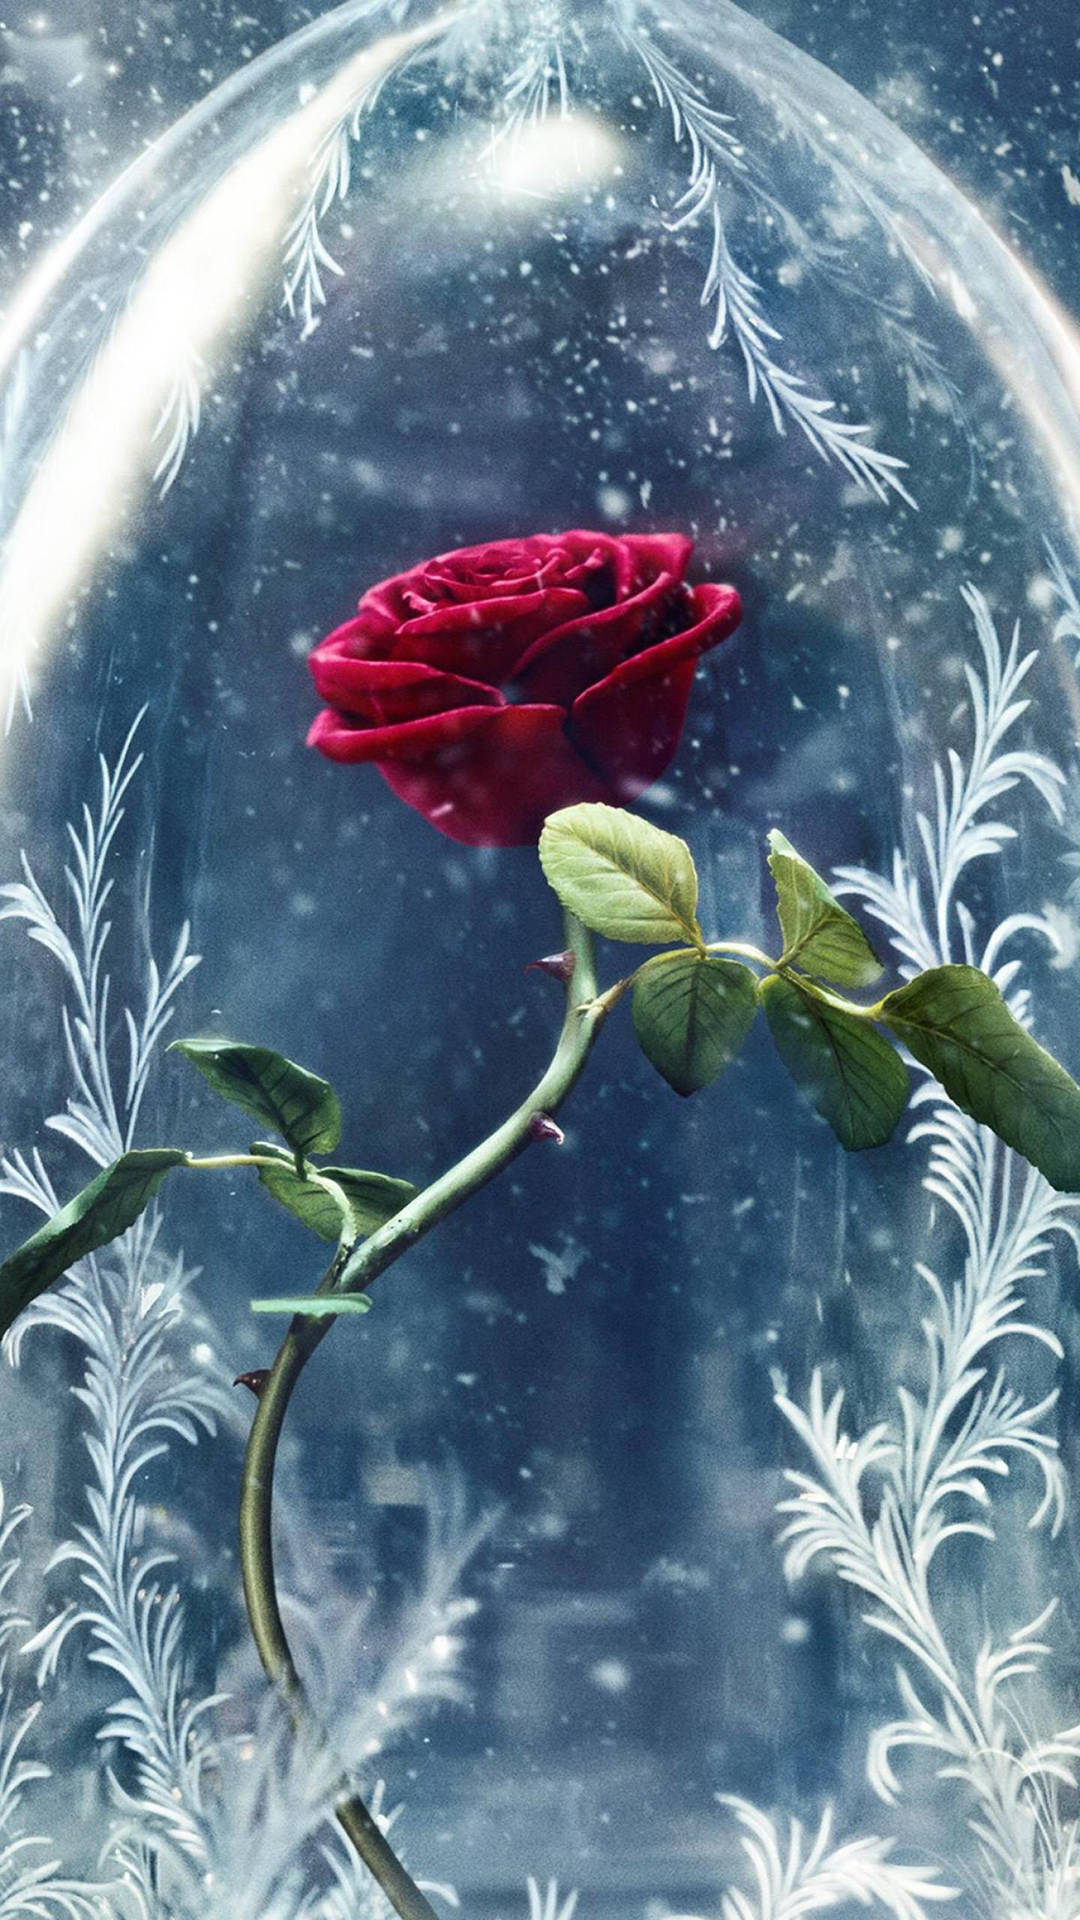 Beauty And The Beast Rose Under Snow